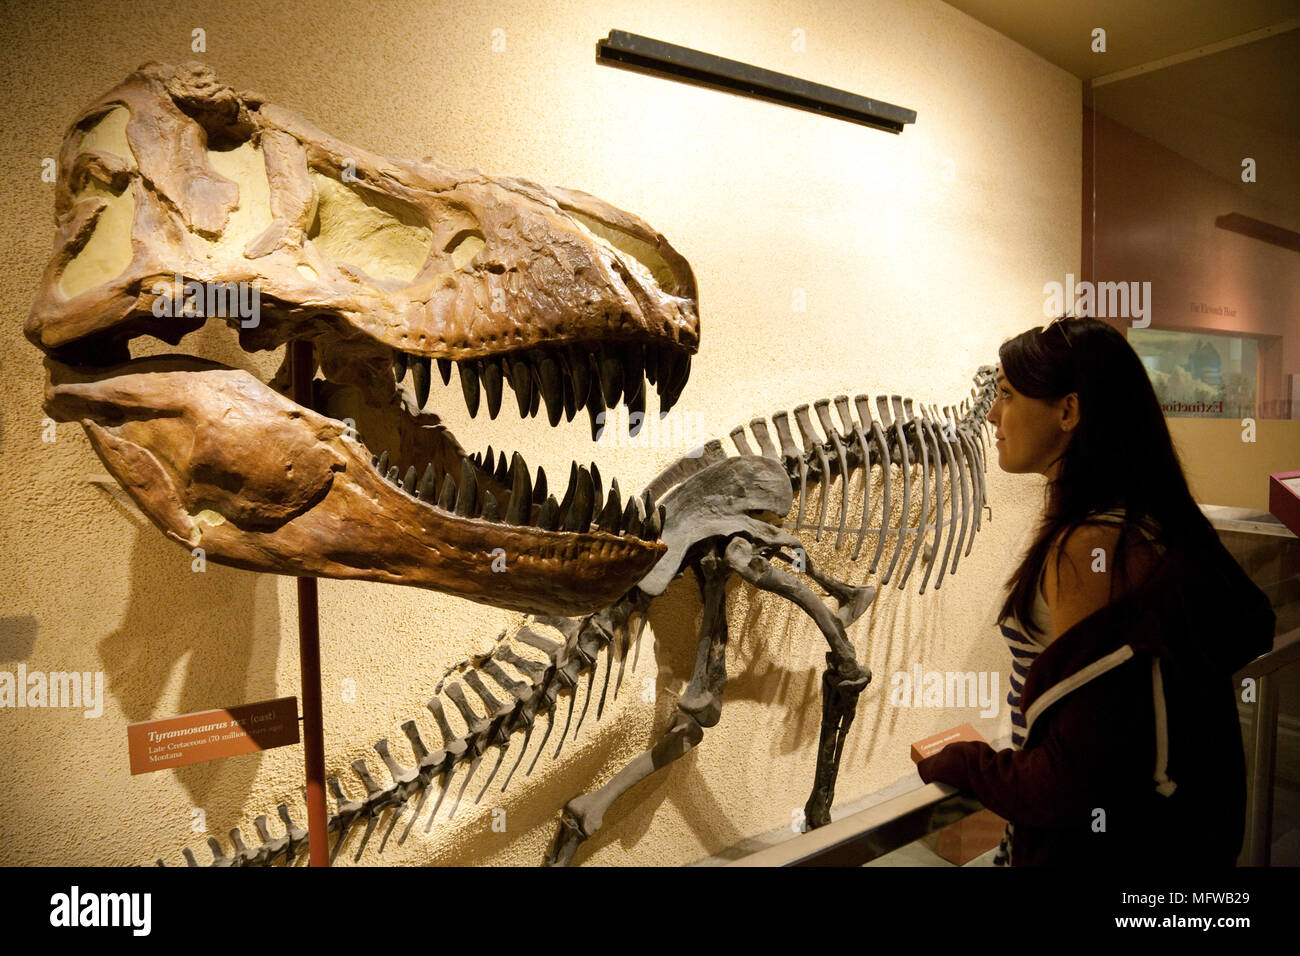 A young woman looking at the skull of a T. Rex dinosaur, National Museum of Natural History, Smithsonian Institute, Washington DC USA Stock Photo